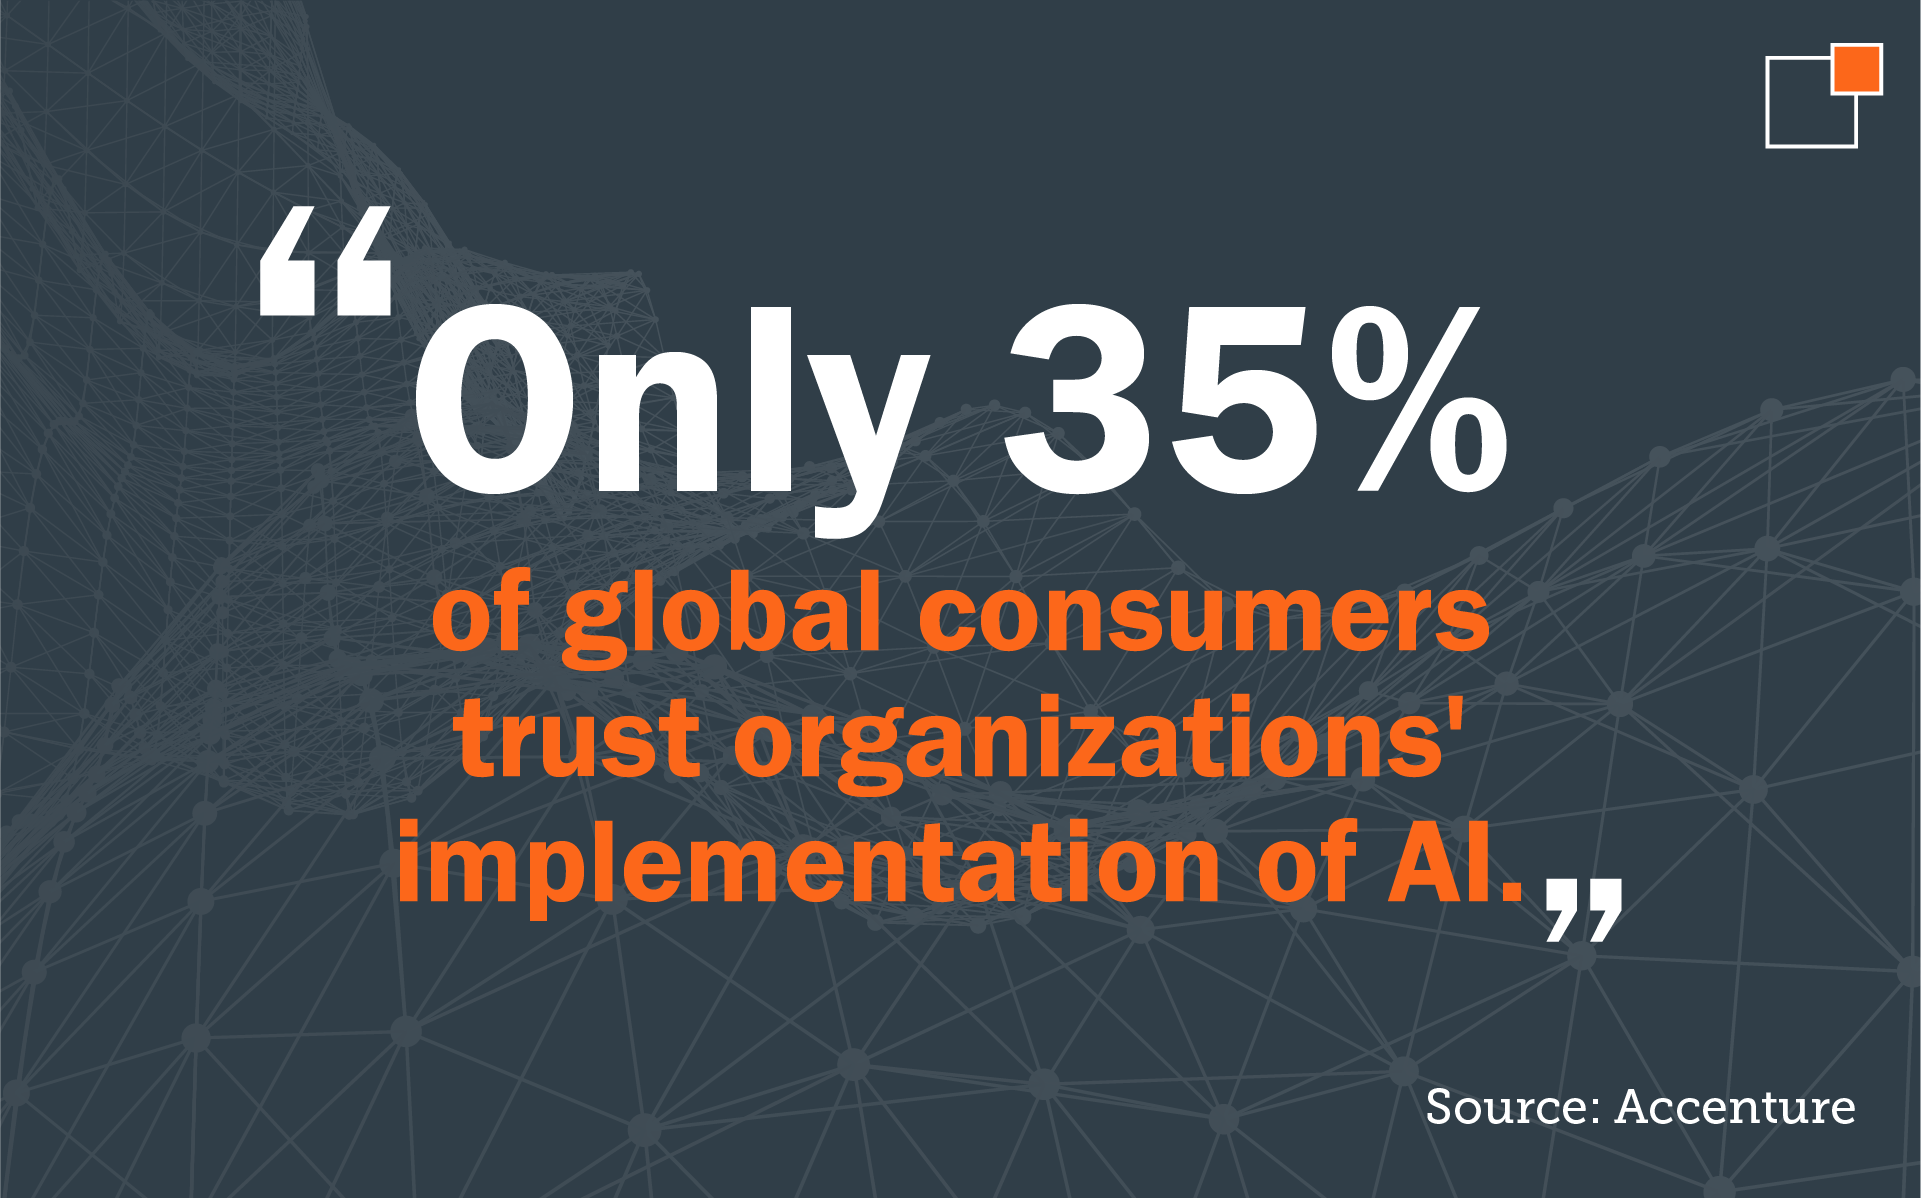 "Only 35%25 of global consumers trust organizations' implementation of AI." Source: Accenture